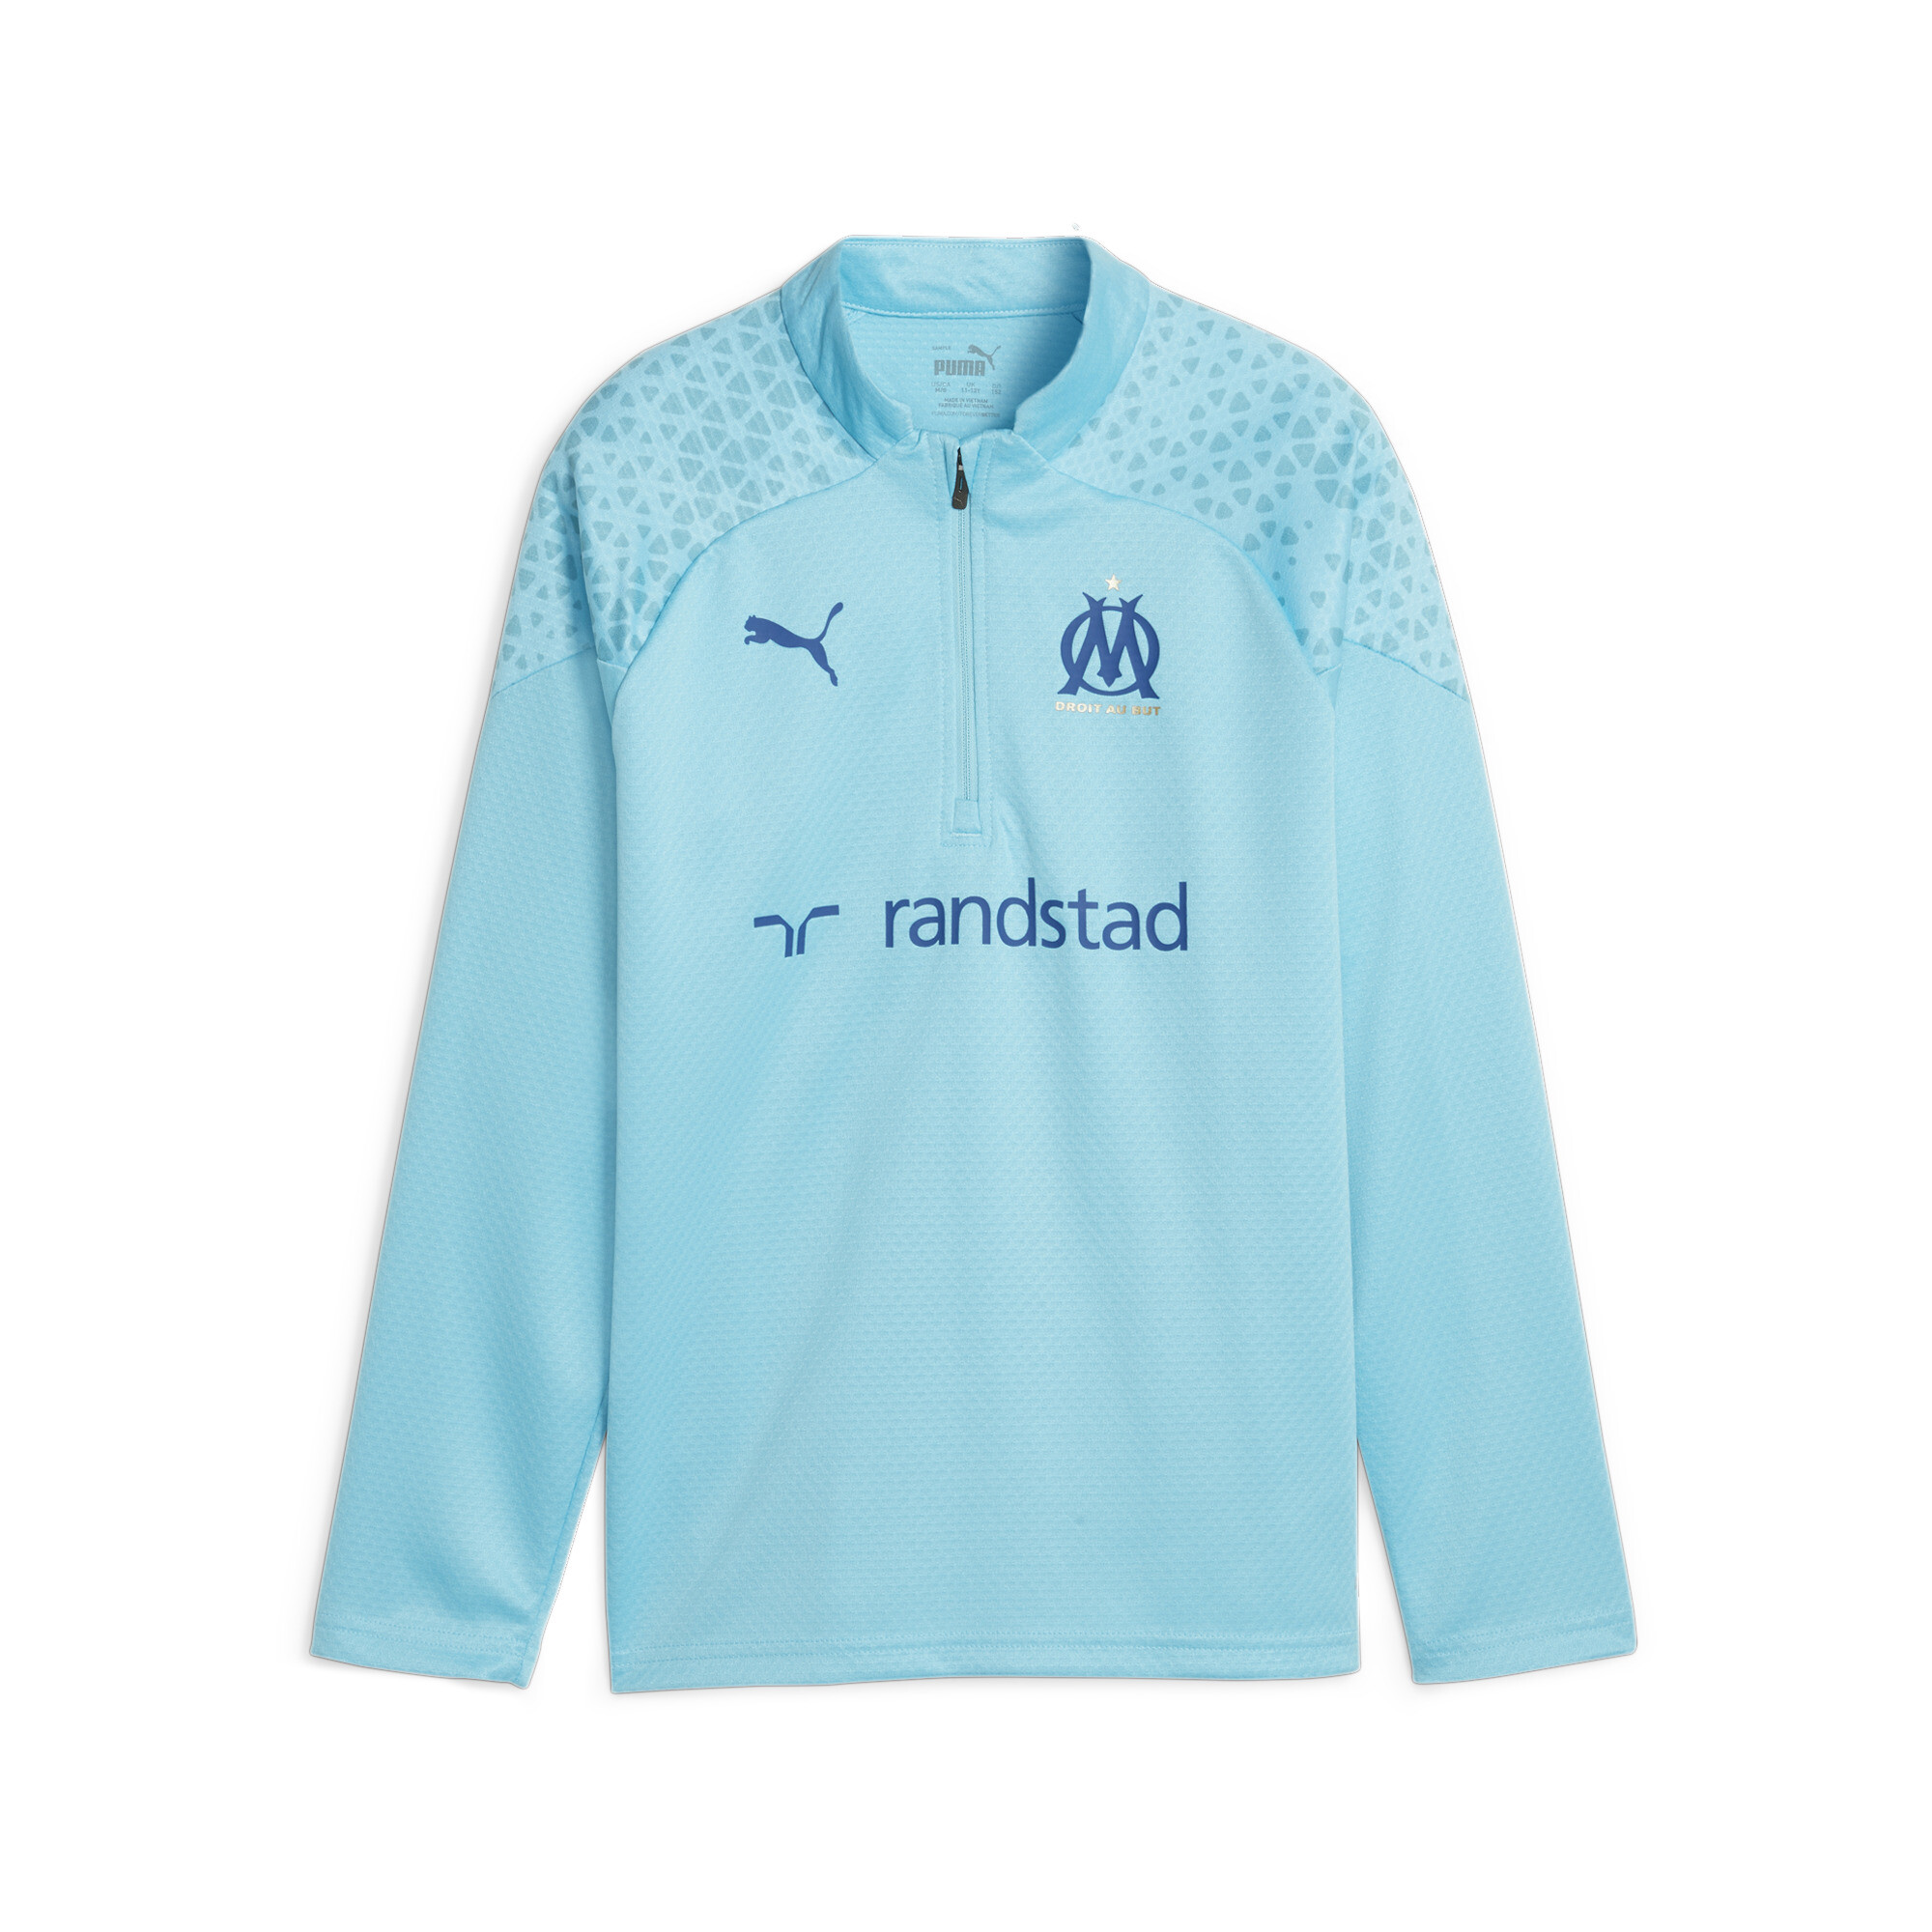 Puma Olympique De Marseille Football Youth Training Quarter-Zip Top, Blue Top, Size 15-16Y Top, Clothing